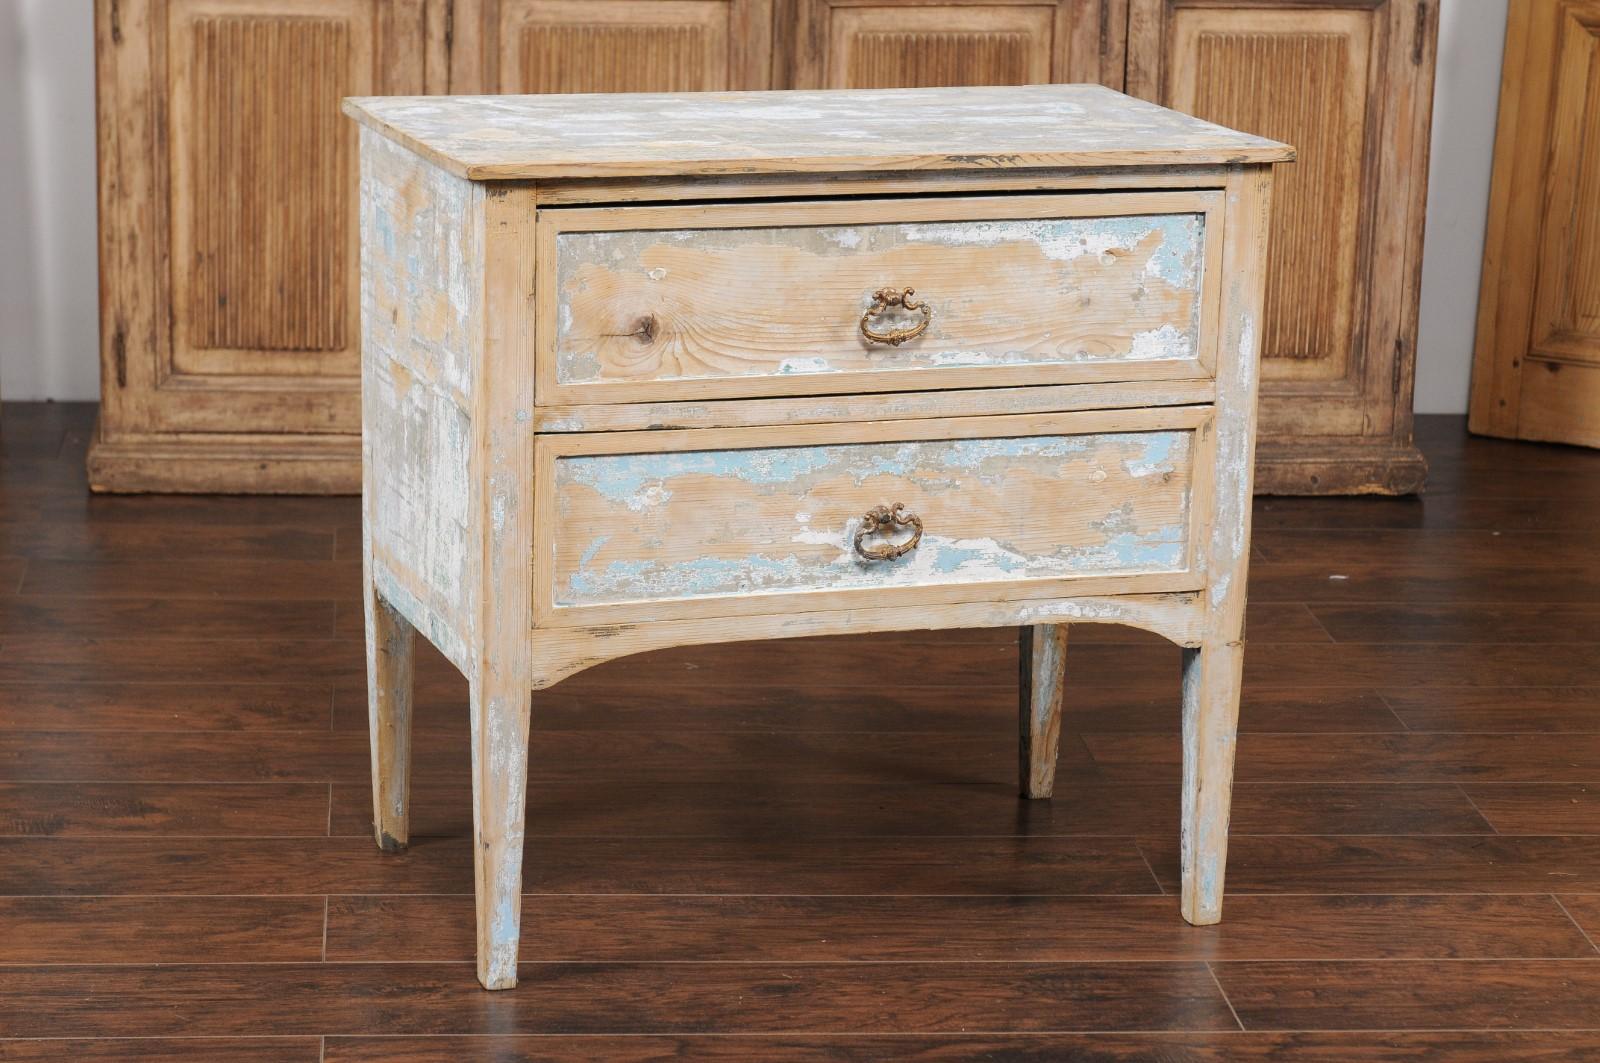 A French two-drawer commode from the early 20th century, with distressed paint and tapered legs. Created in France during the turn of the century, this commode features a rectangular top sitting above two drawers, each fitted with elegant hardware.